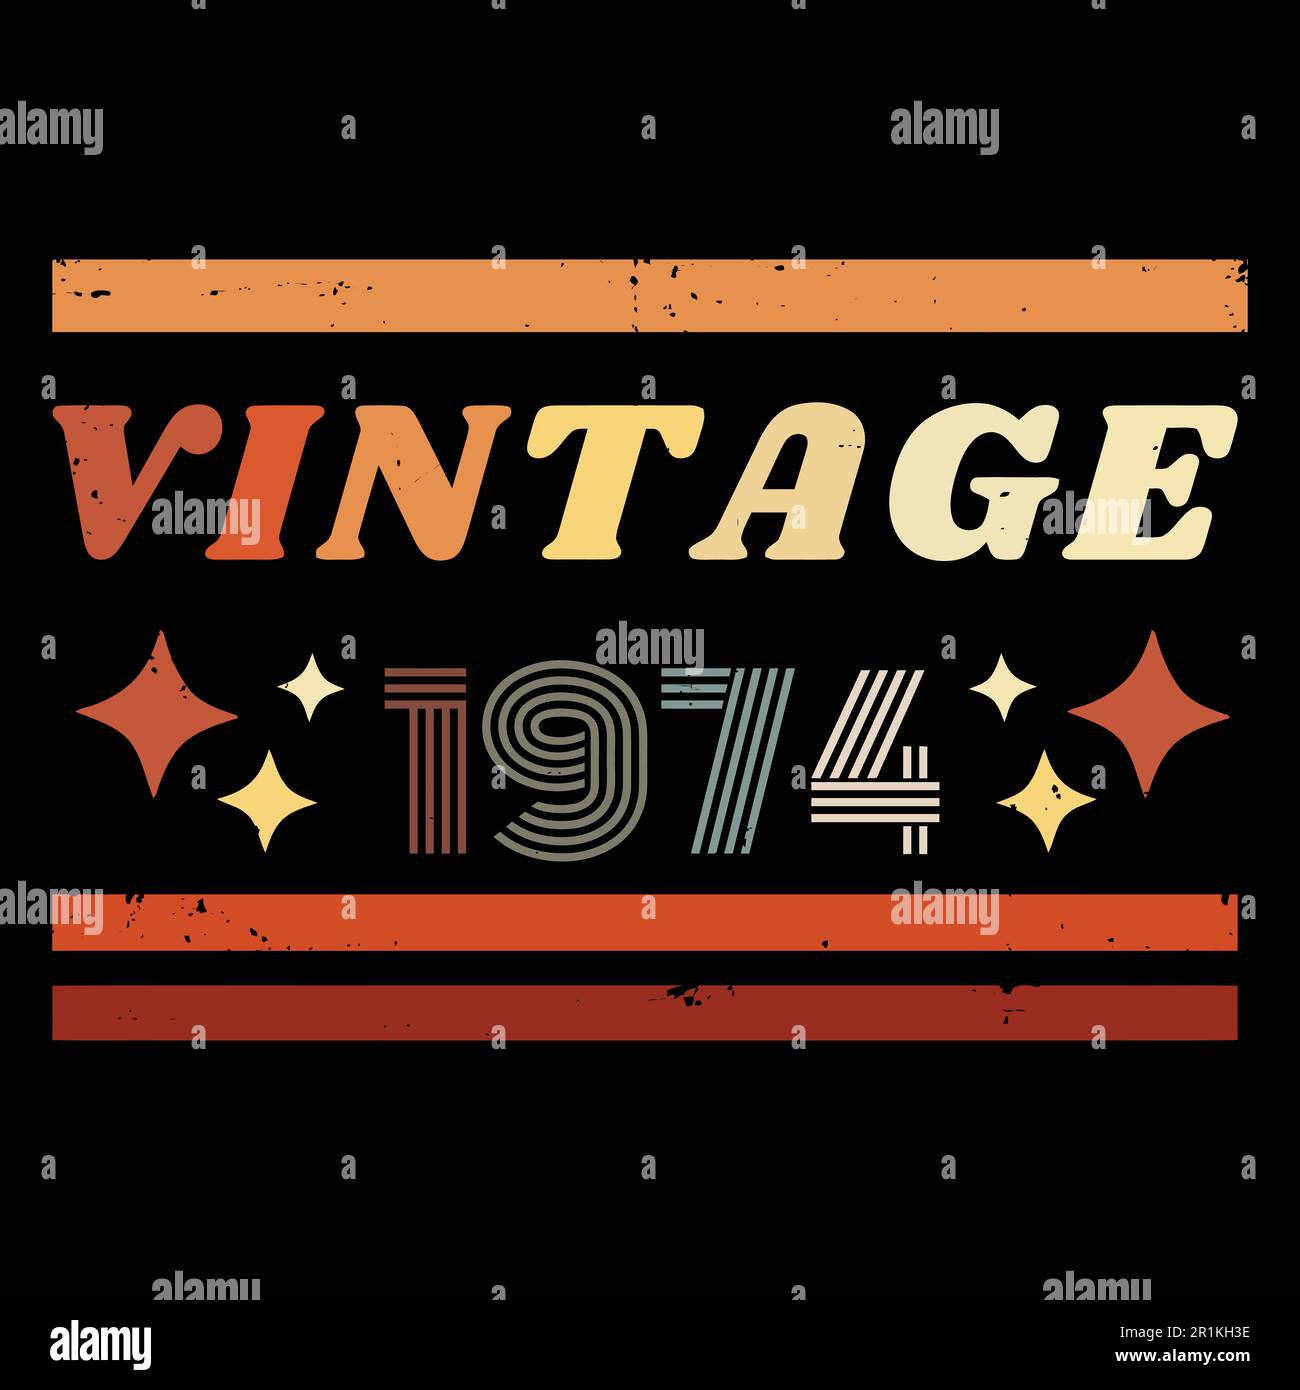 1974 vintage colorful retro t shirt design with vector elements Stock Vector